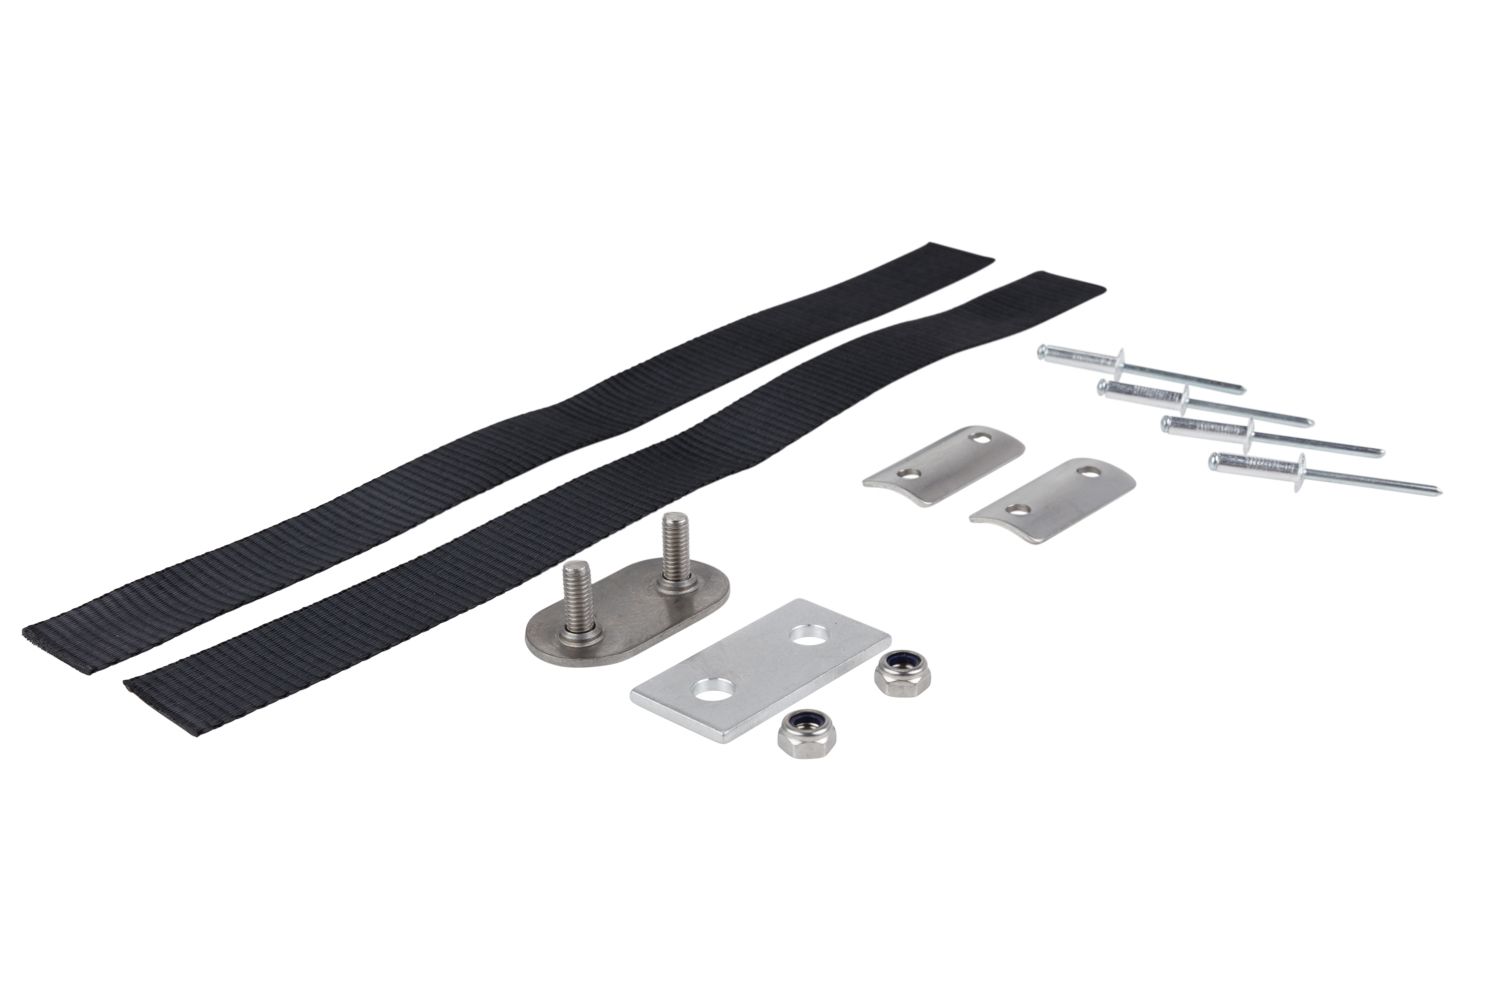 kit containing everything you need to make a truck curtain pole handle